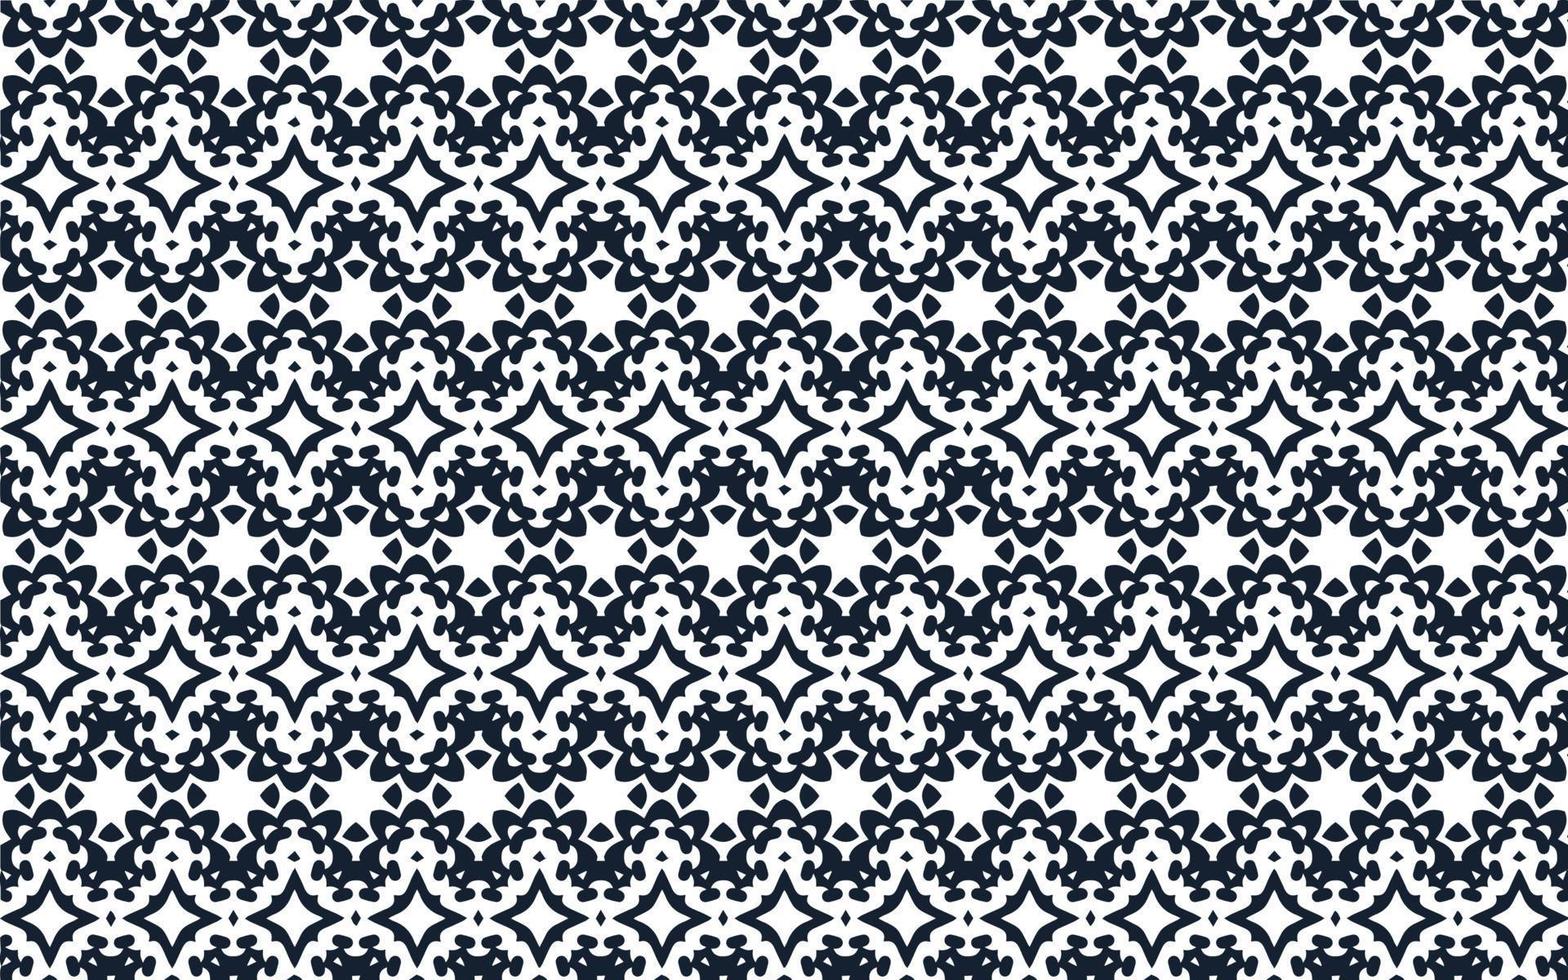 These are abstract arabesque seamless pattern designs vector